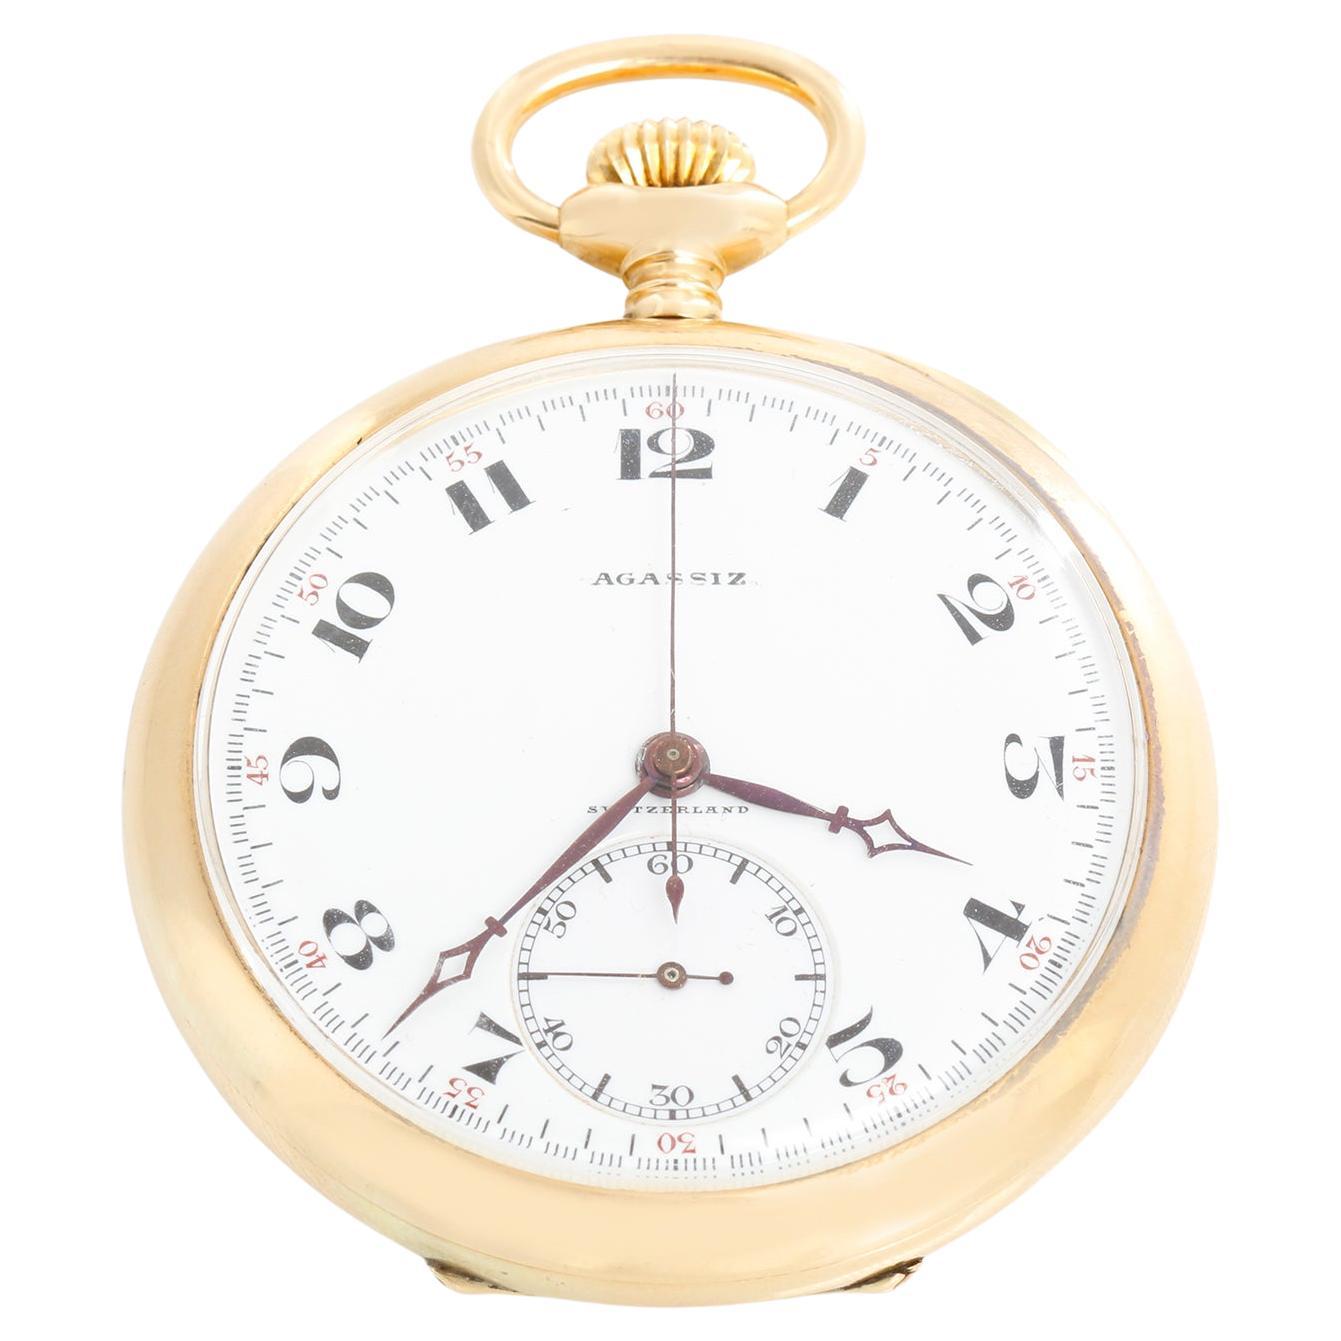 Agassiz Chronograph 14K Yellow Gold Pocket Watch Owned by Wiley Post